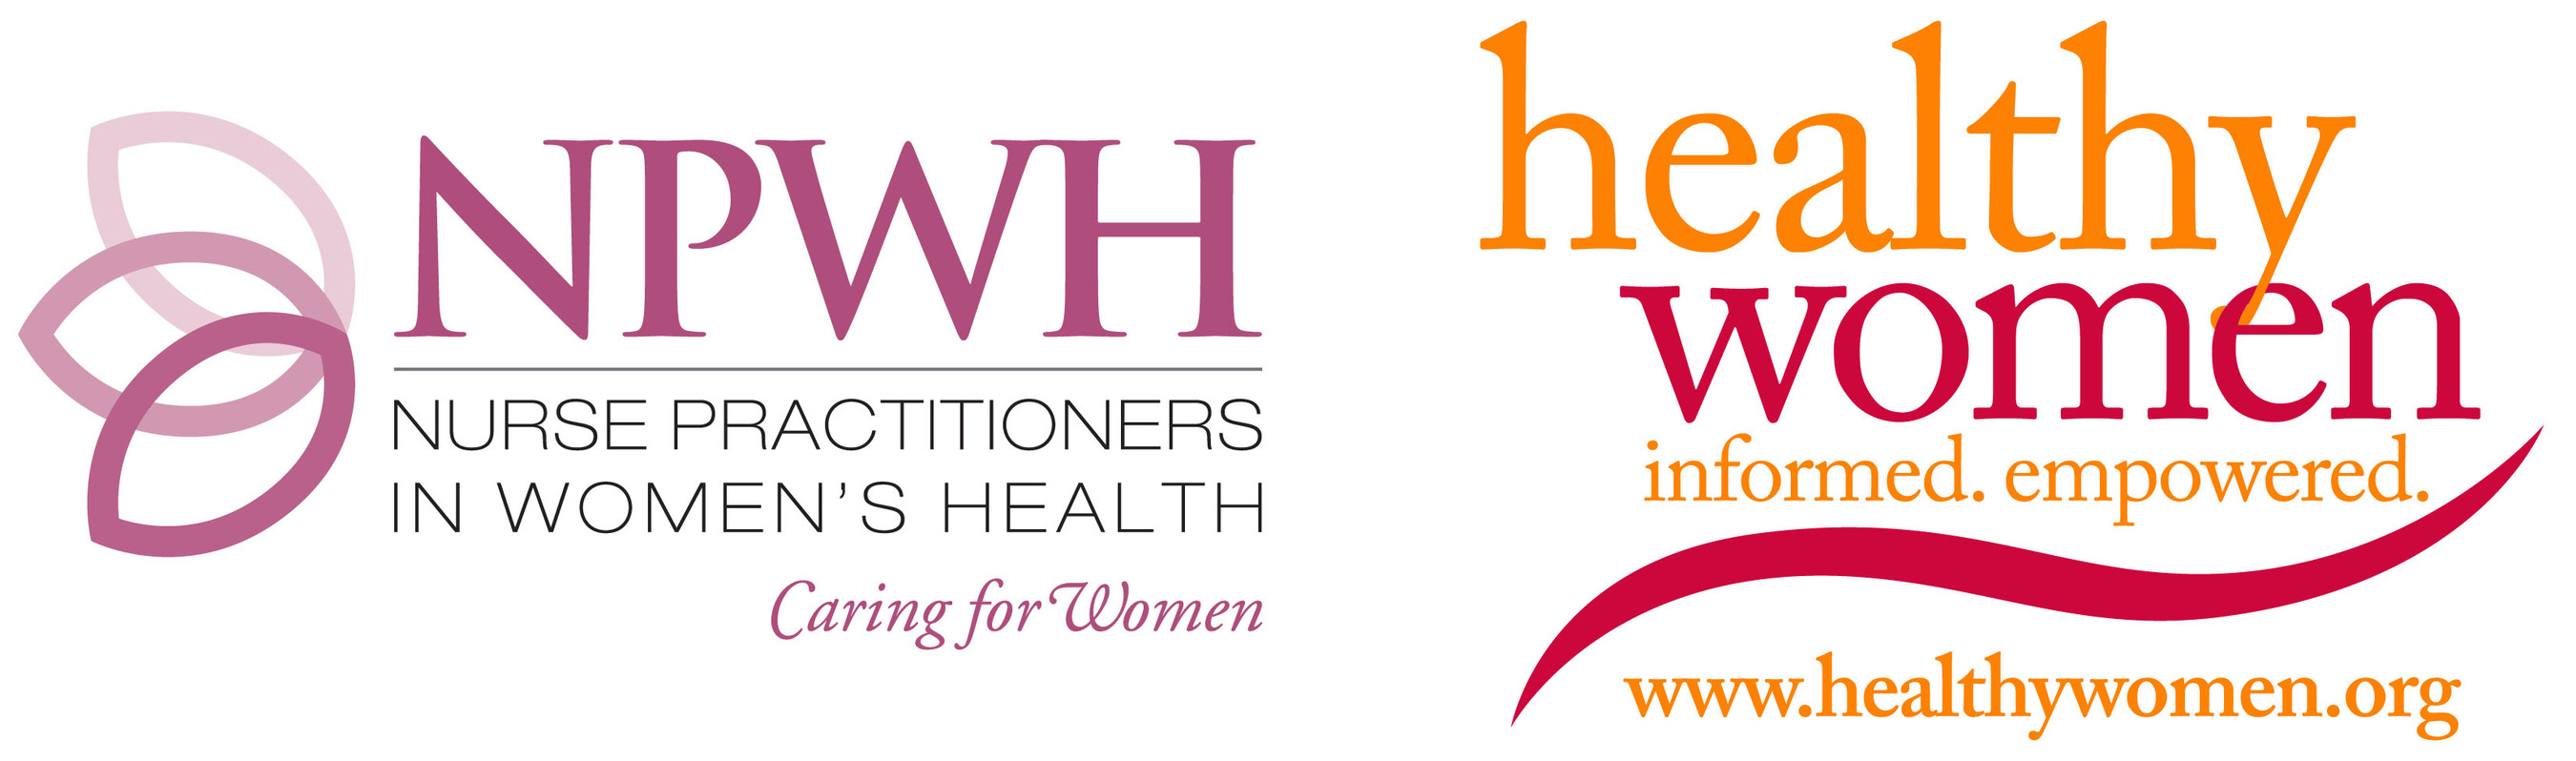 National Association of Nurse Practitioners in Women's Health and HealthyWomen